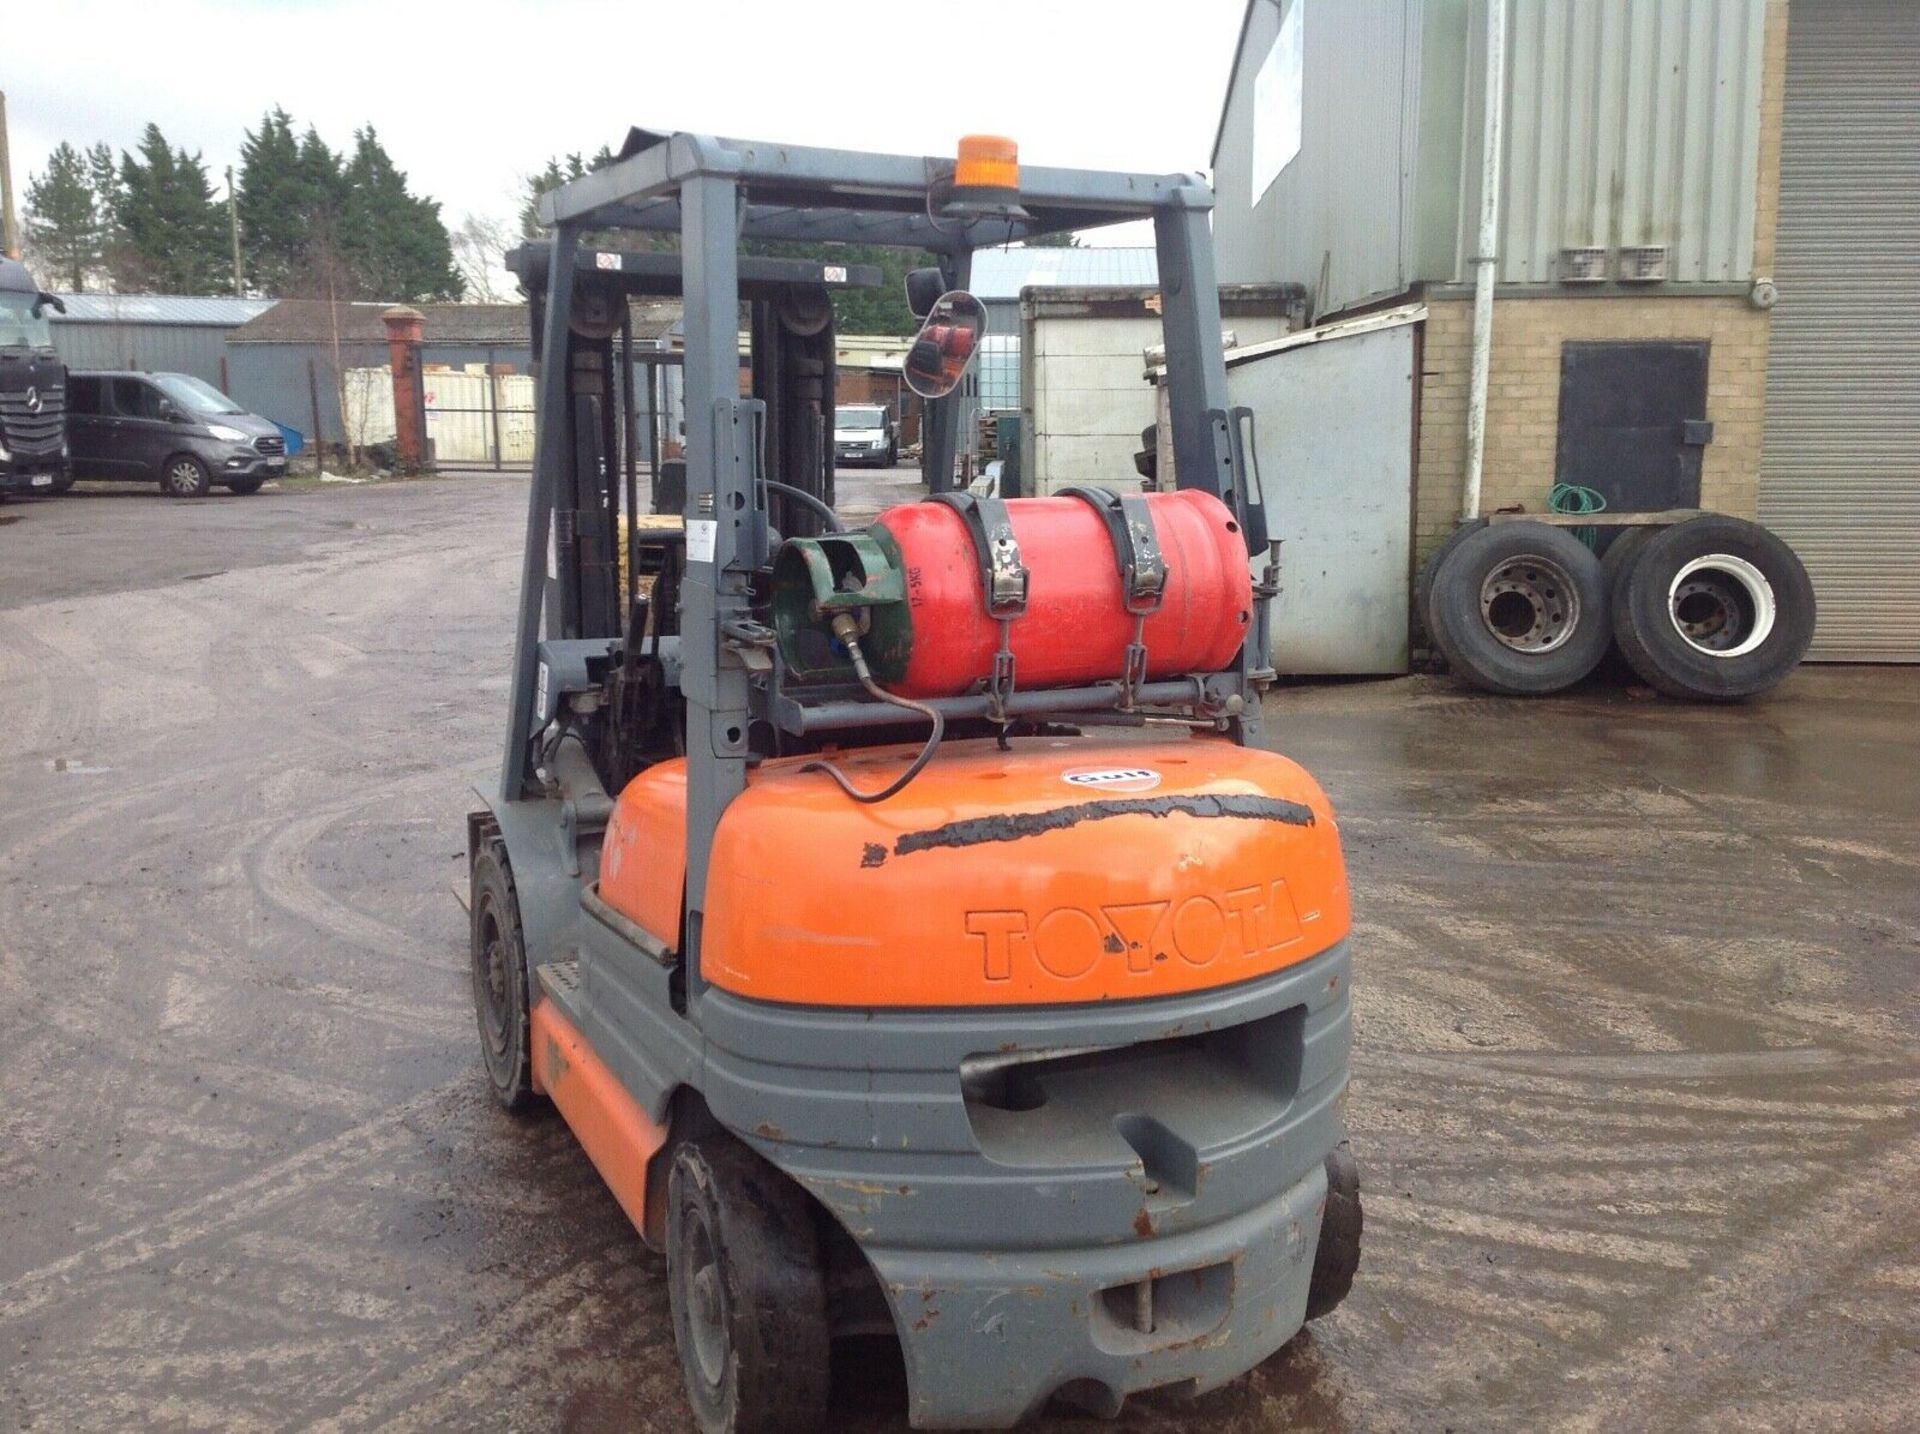 Toyota 2.5 ton gas forklift - Image 2 of 5